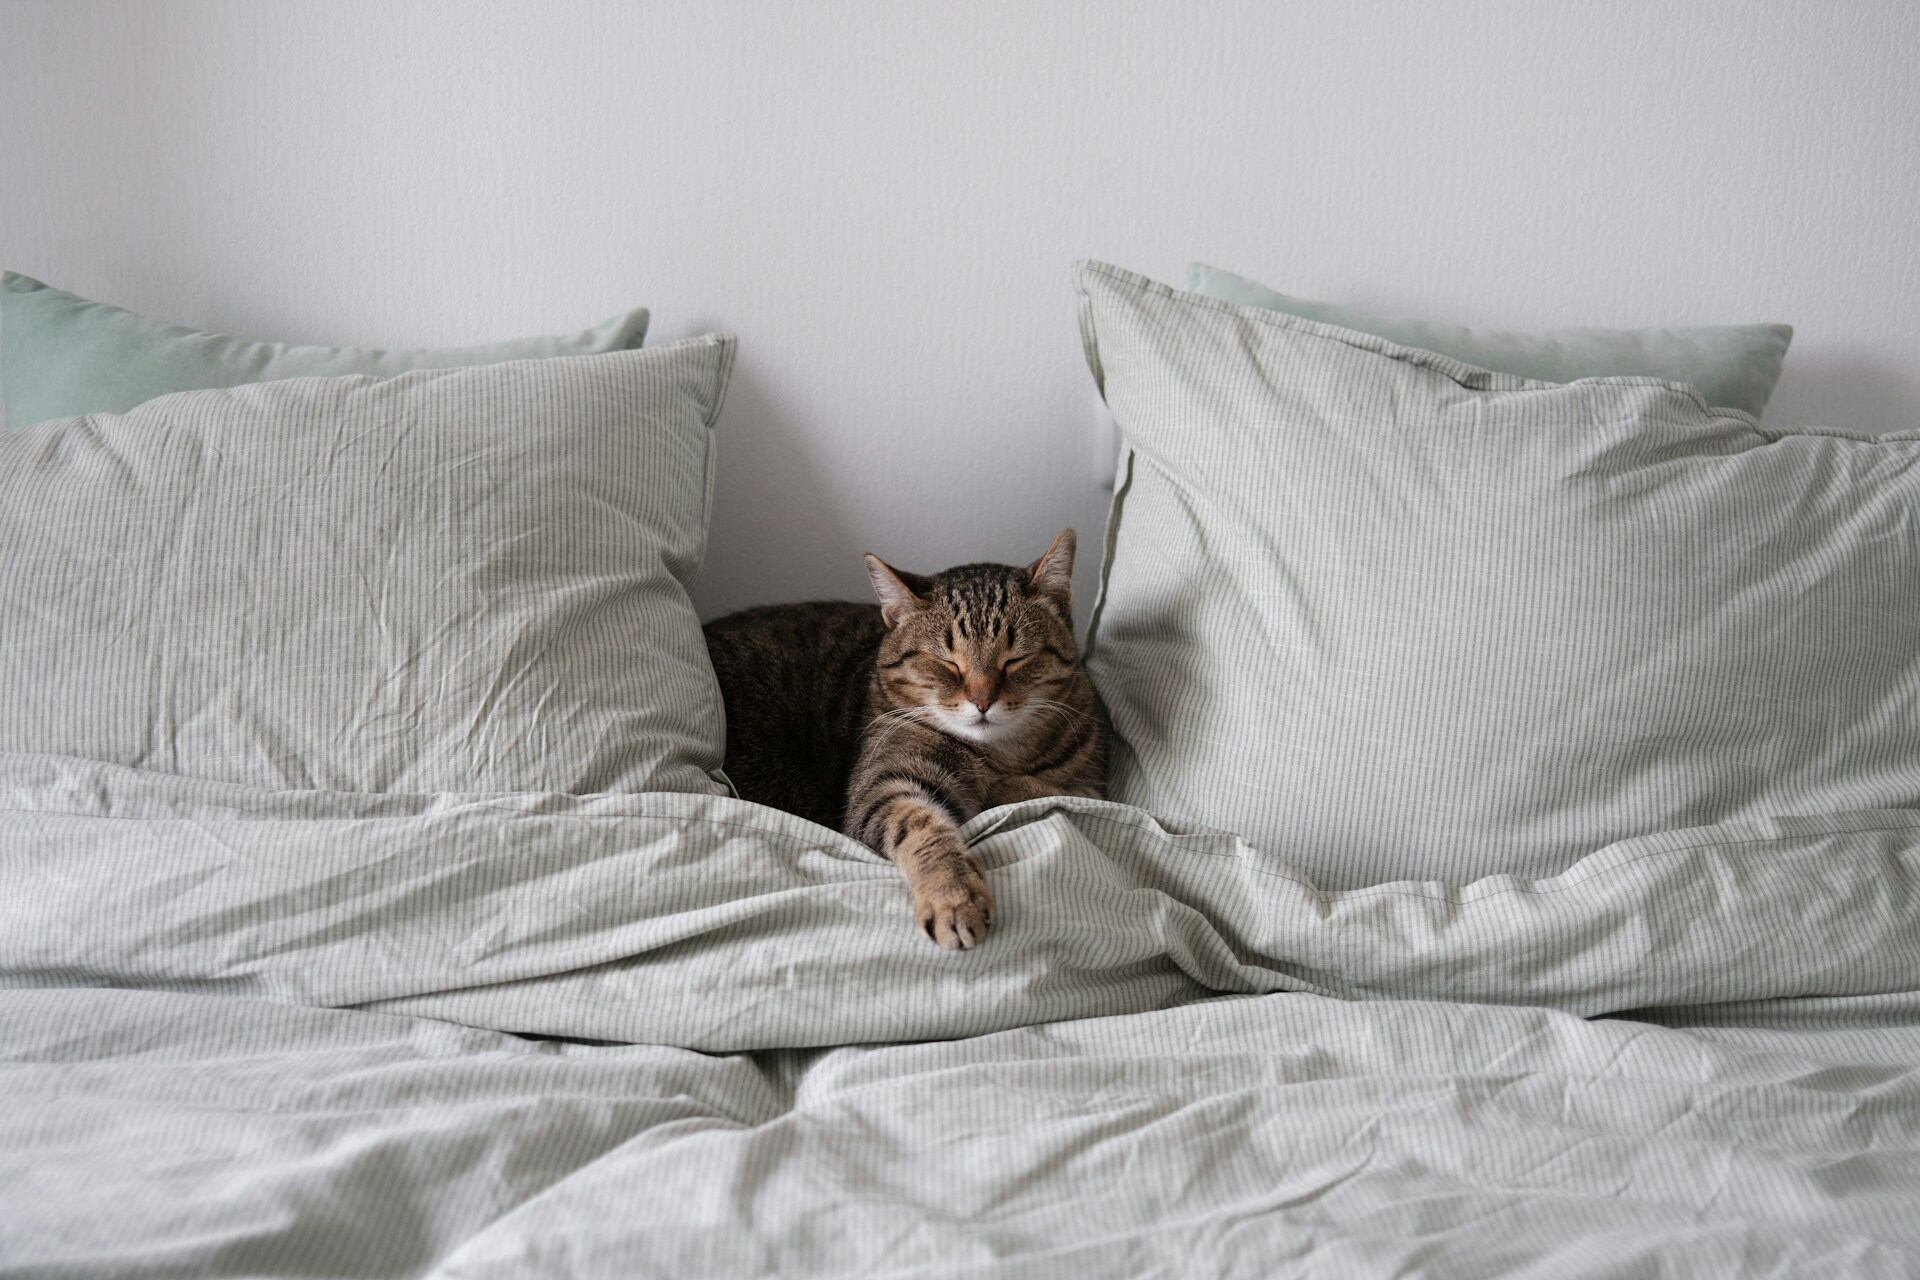 A cat sleeping upright in bed between two pillows